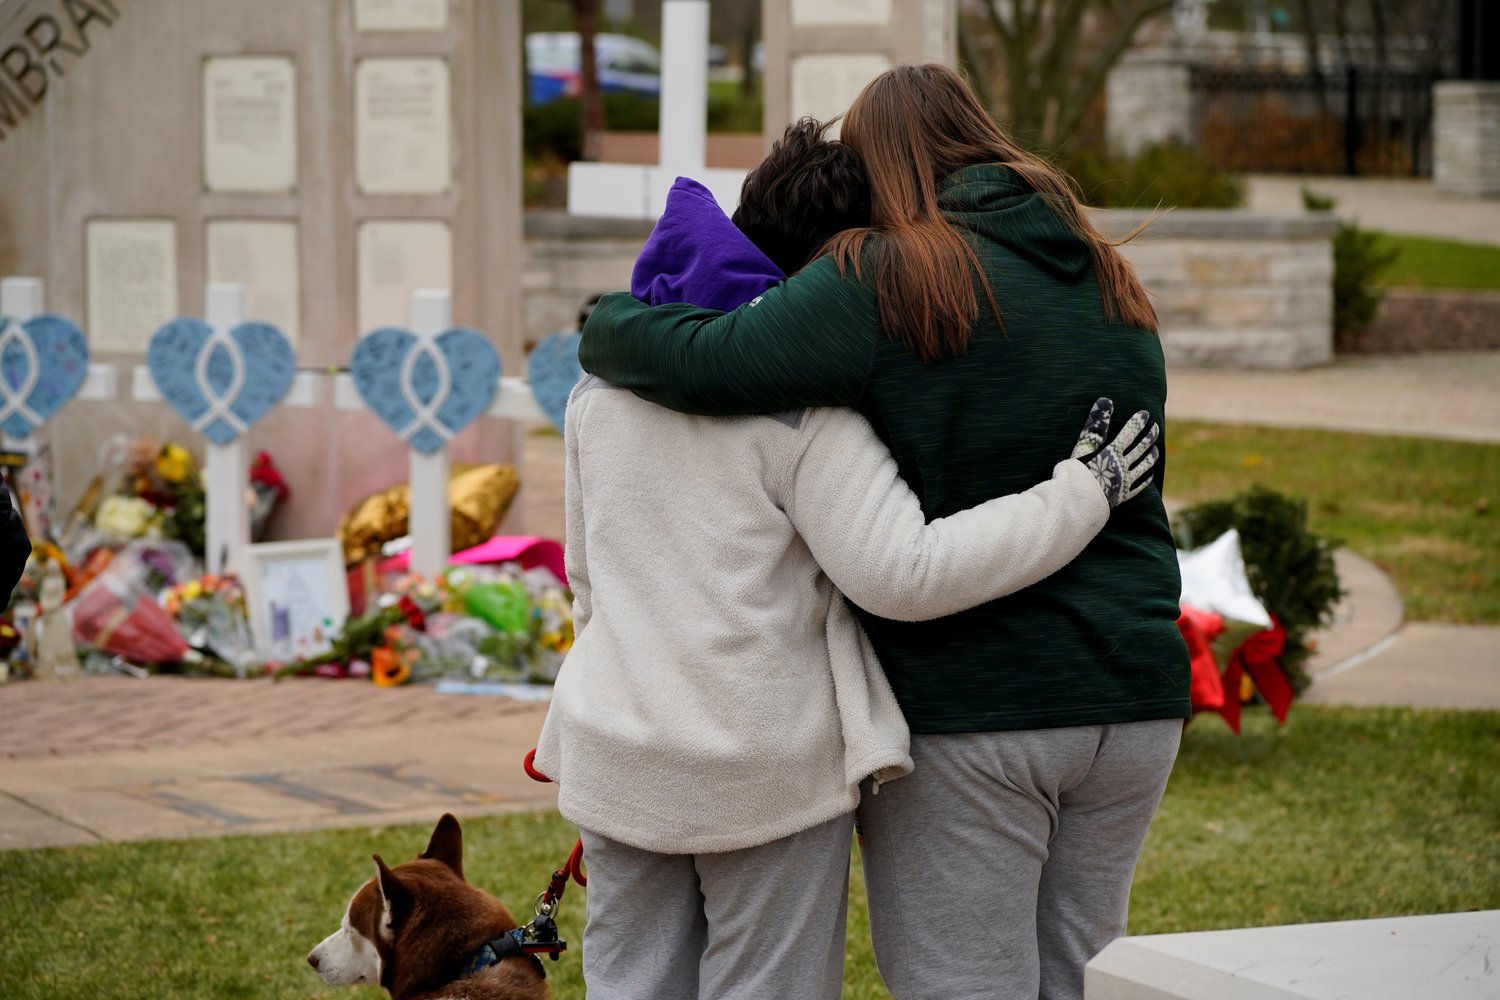 People in Waukesha, Wis., embrace while visiting a memorial Nov. 24, 2021,  the morning after the sixth victim Jackson Sparks, 8, passed away inside Children's Hospital of Wisconsin as a result of injuries sustained when a car plowed through a holiday parade.